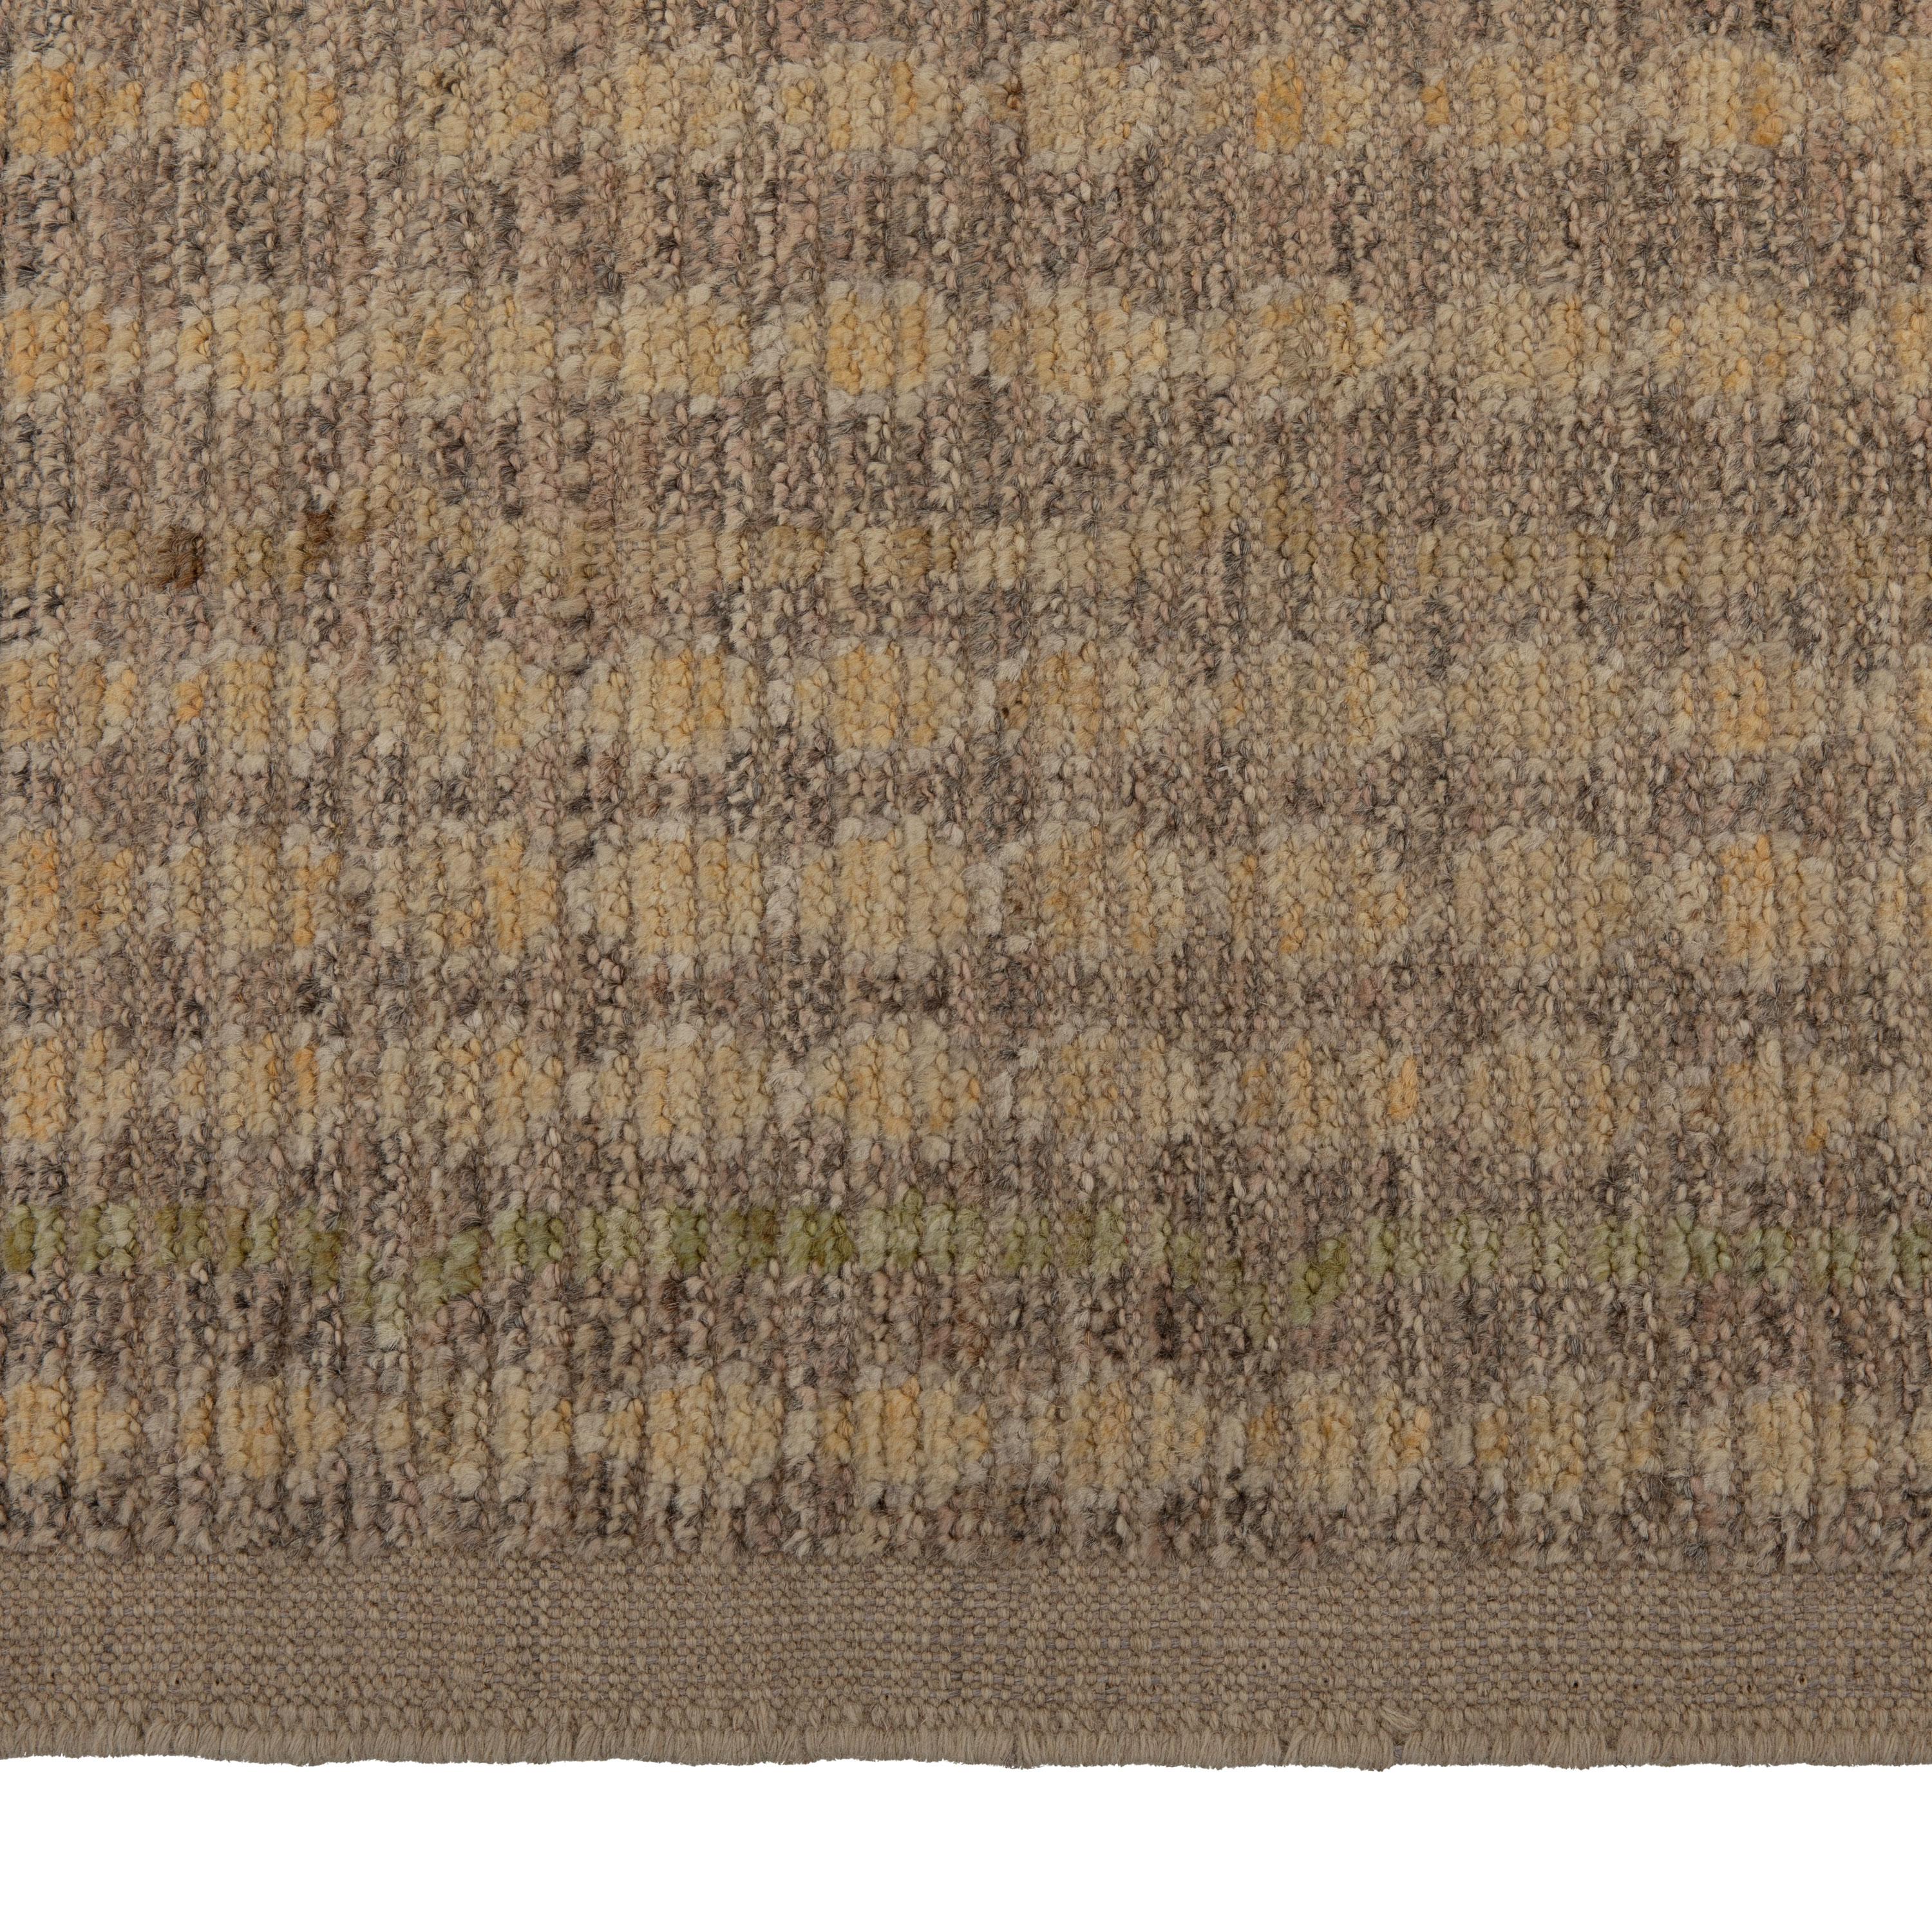 Inspired by the grounding foundations of Earth's natural colors and pure materials, the Zameen Collection features a wide array of Mid-century modern motifs in soft neutral tones. Hand-knotted in Central Asia, Zameen rugs will be celebrated for